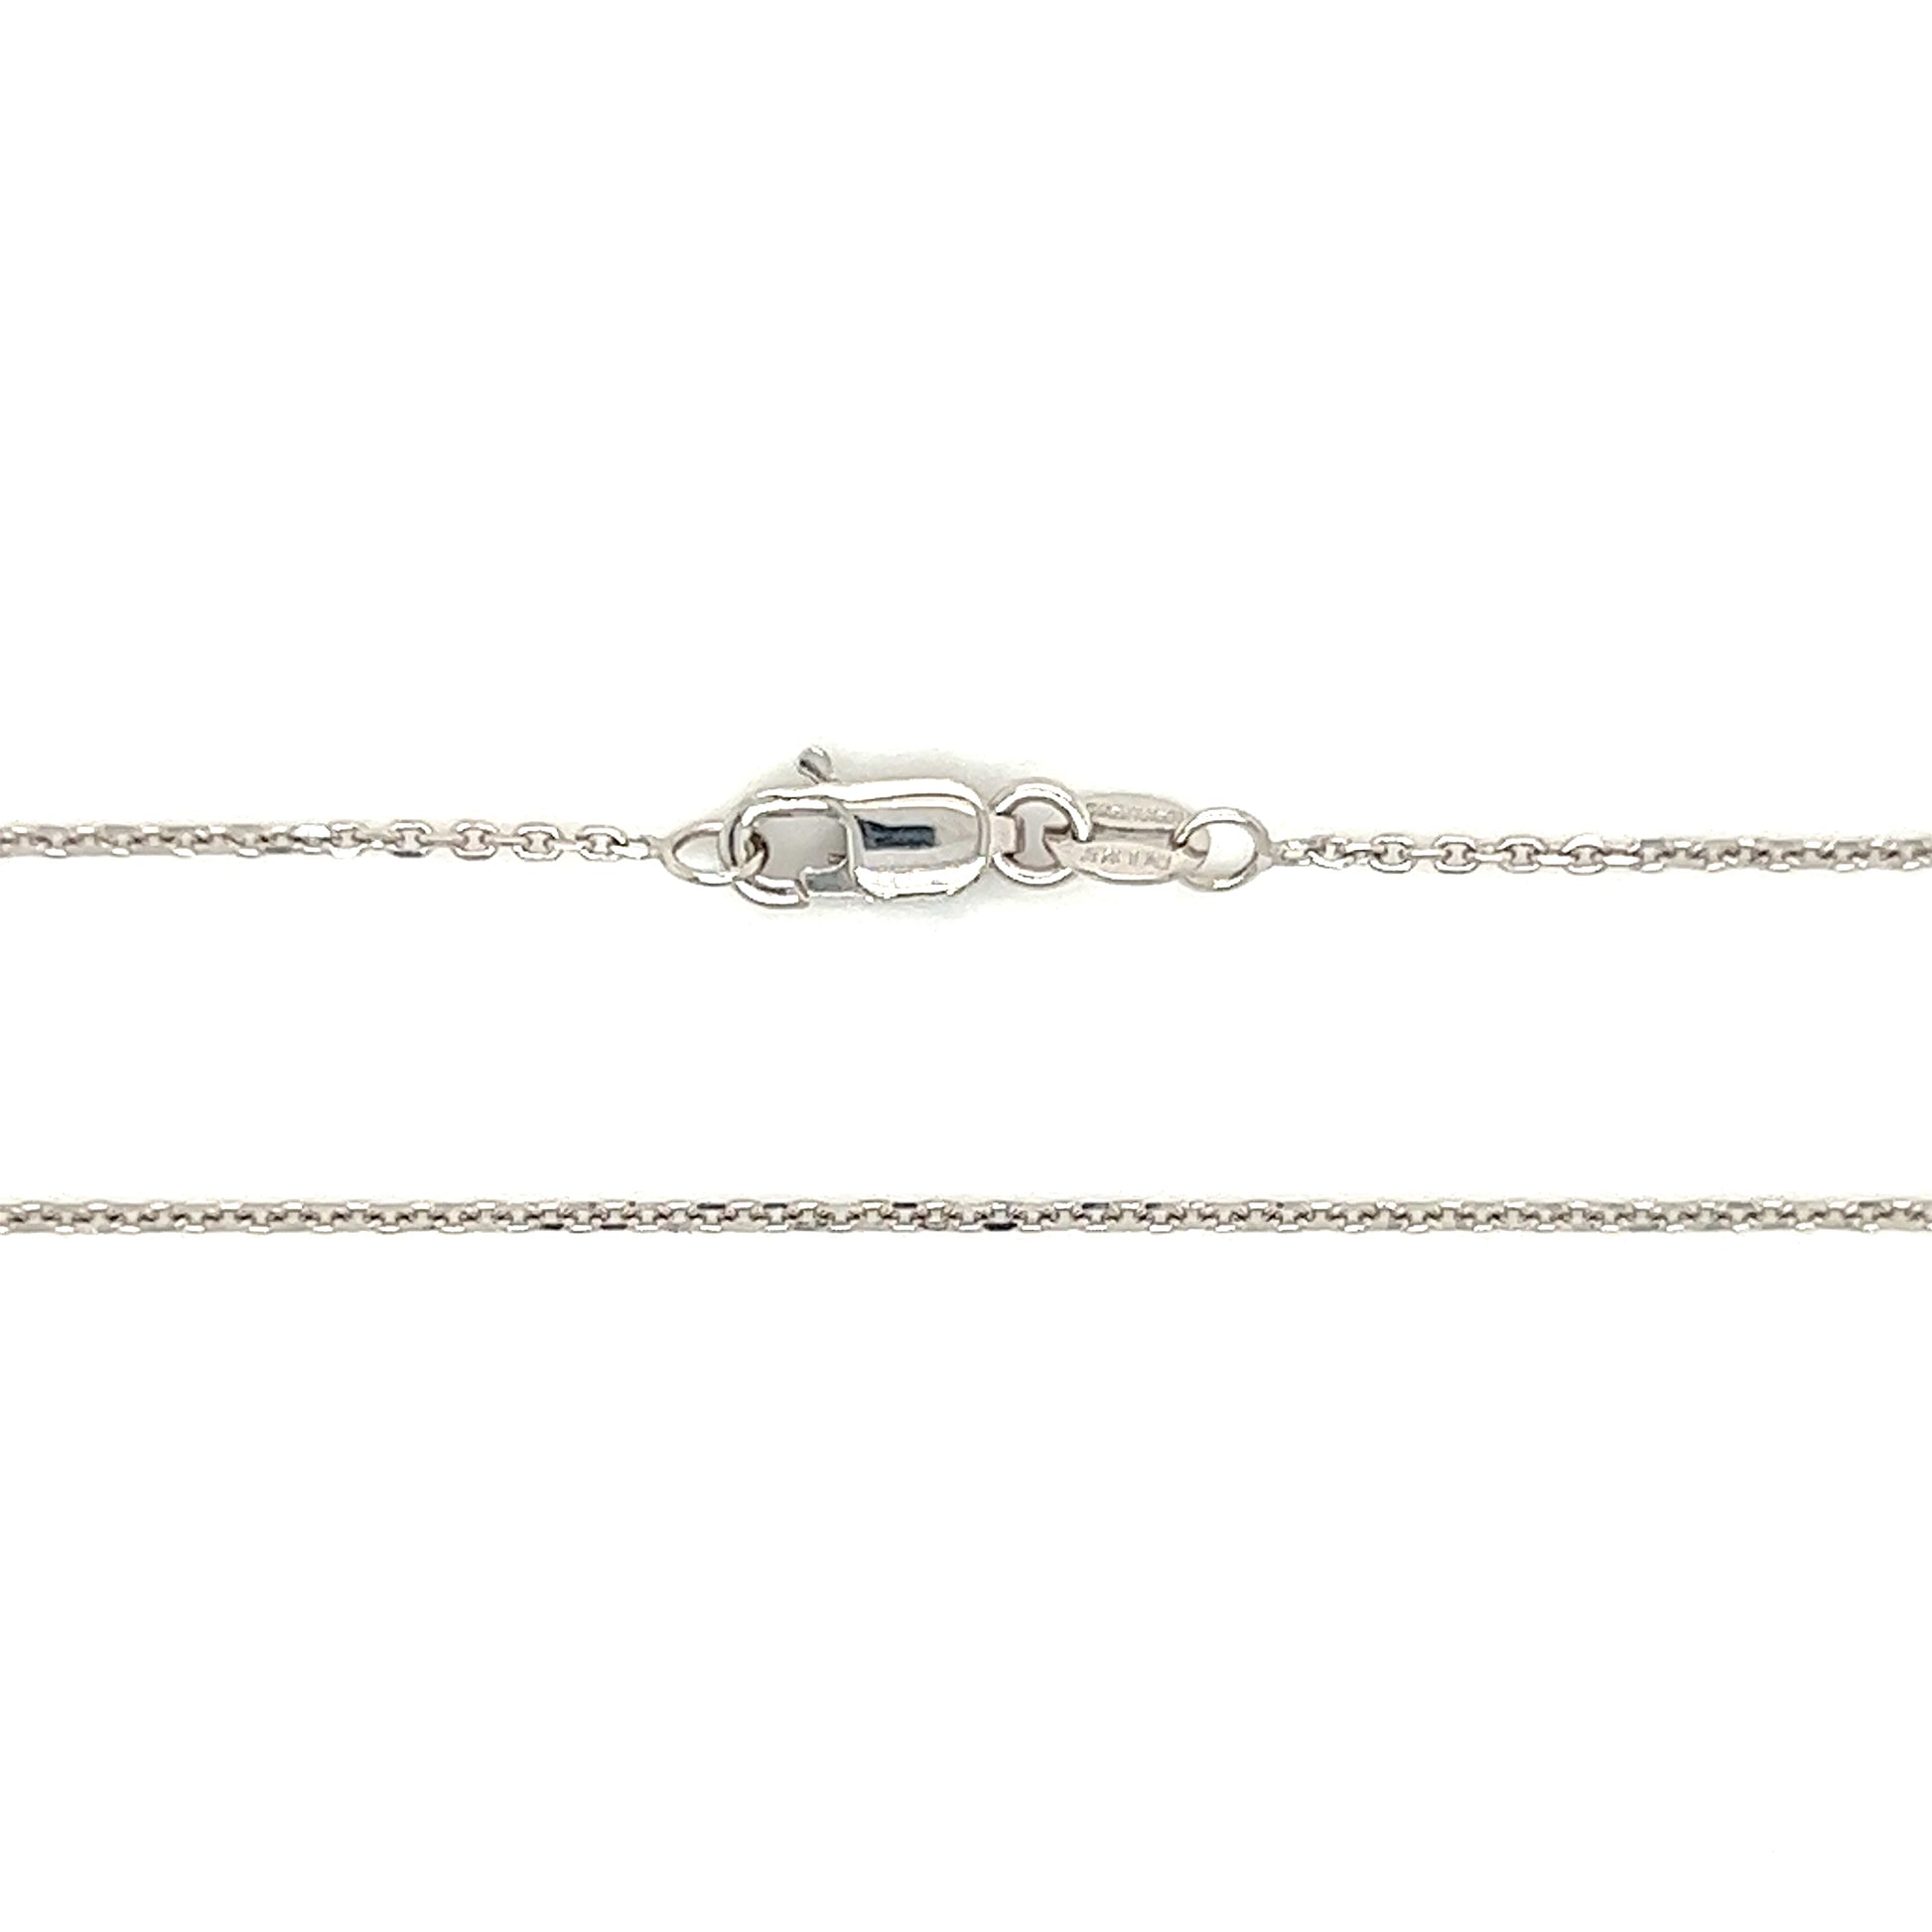 Cable 1.0mm Chain with 18in Length in 14K White Gold Chain and Clasp View